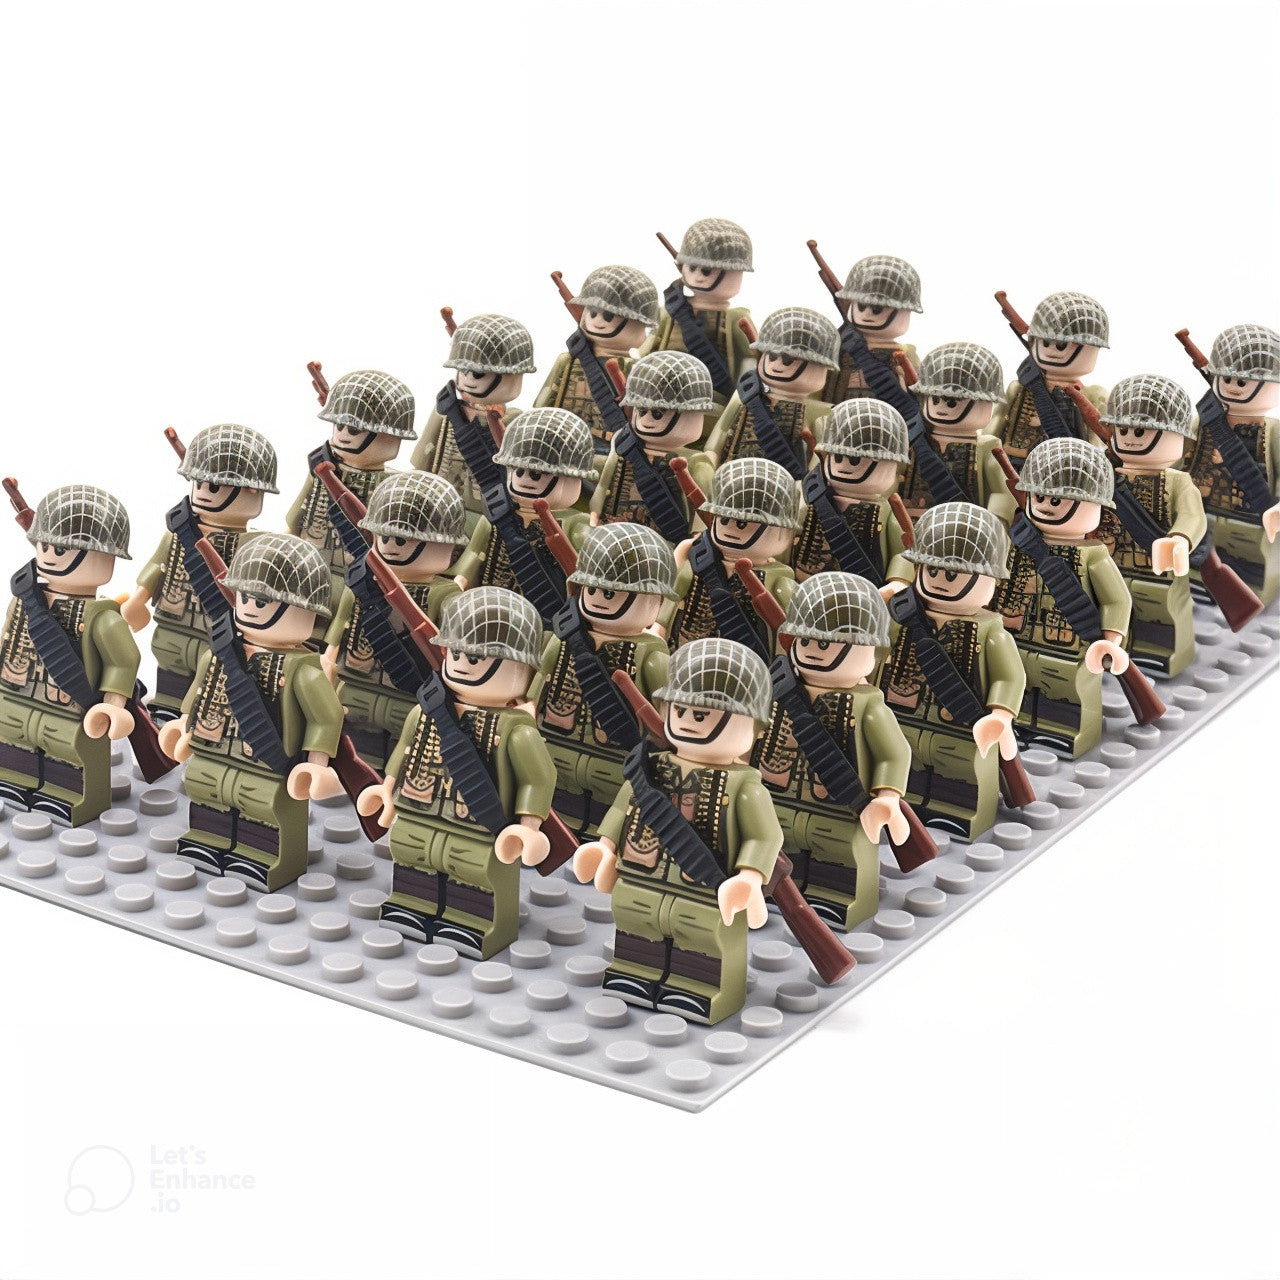 3rd Infantry U.S. WWII Soldiers (24 Figures)